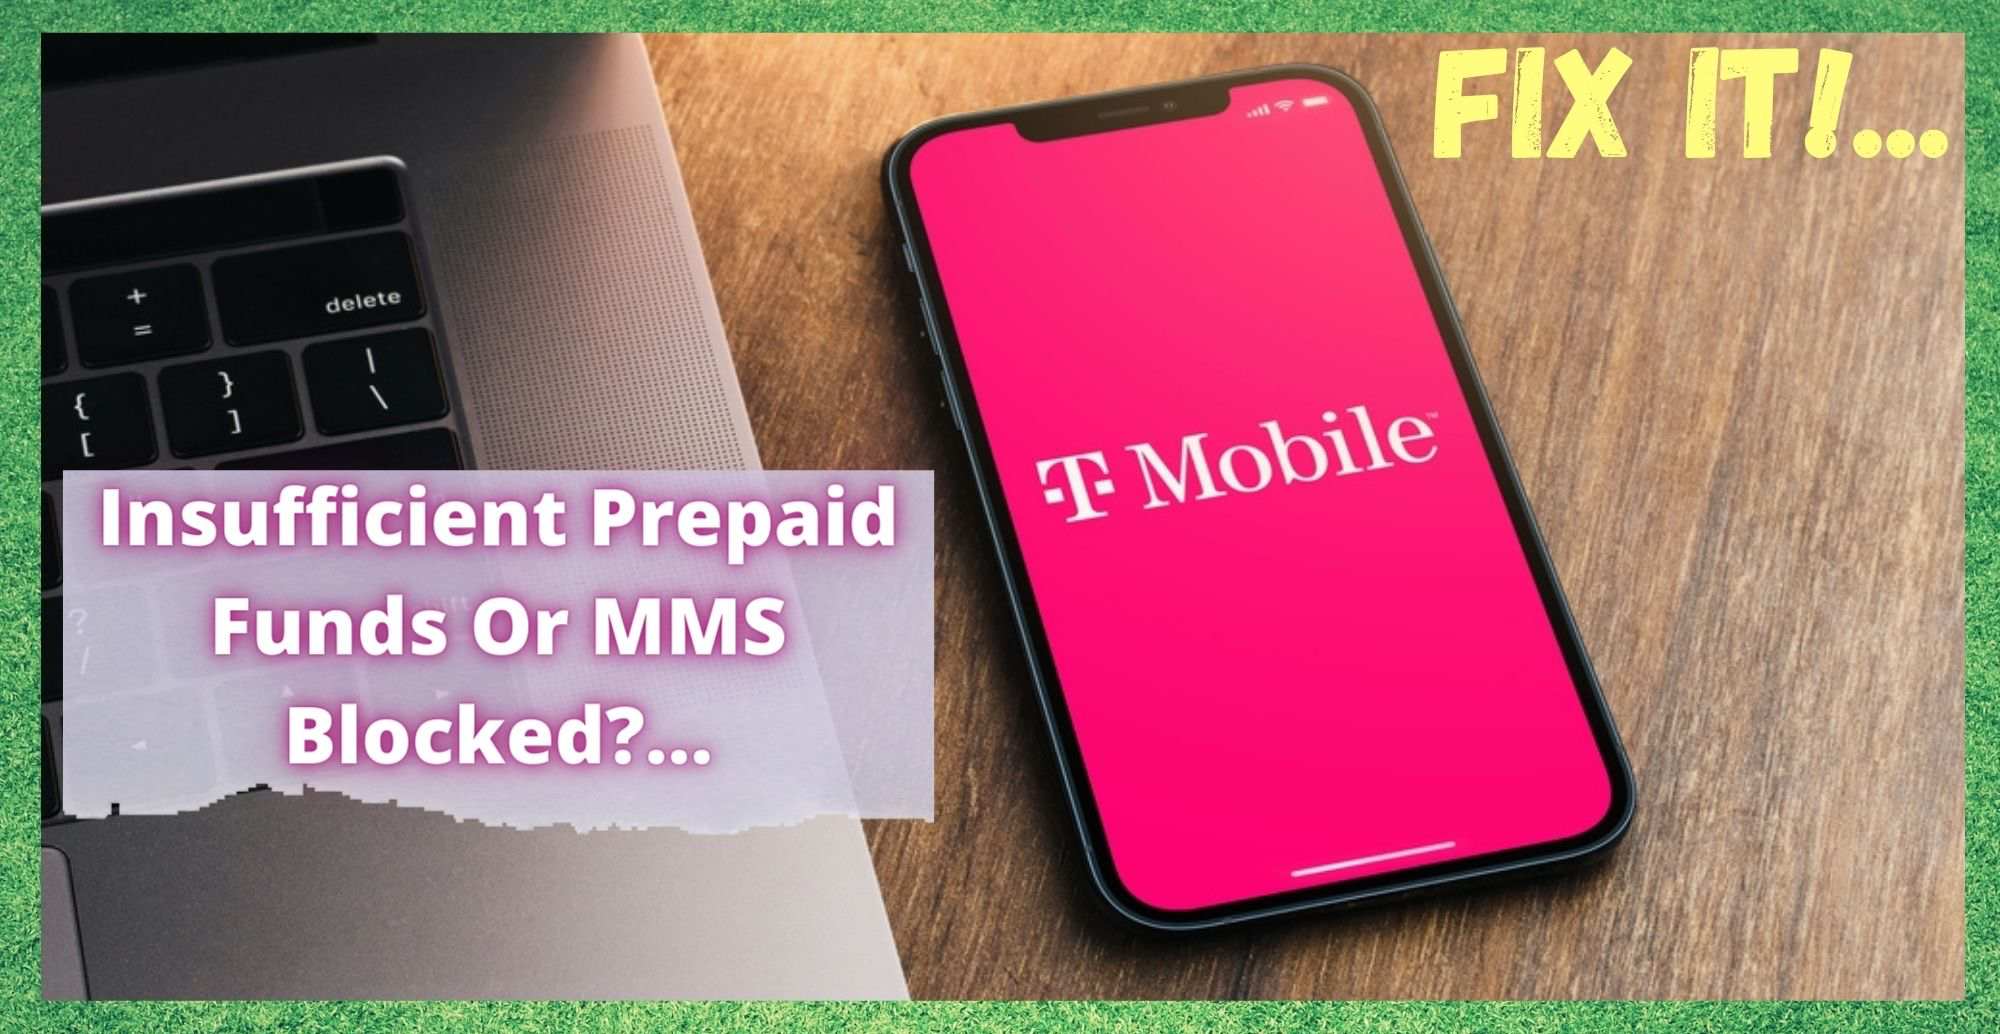 T-Mobile Insufficient Prepaid Funds Or MMS Blocked